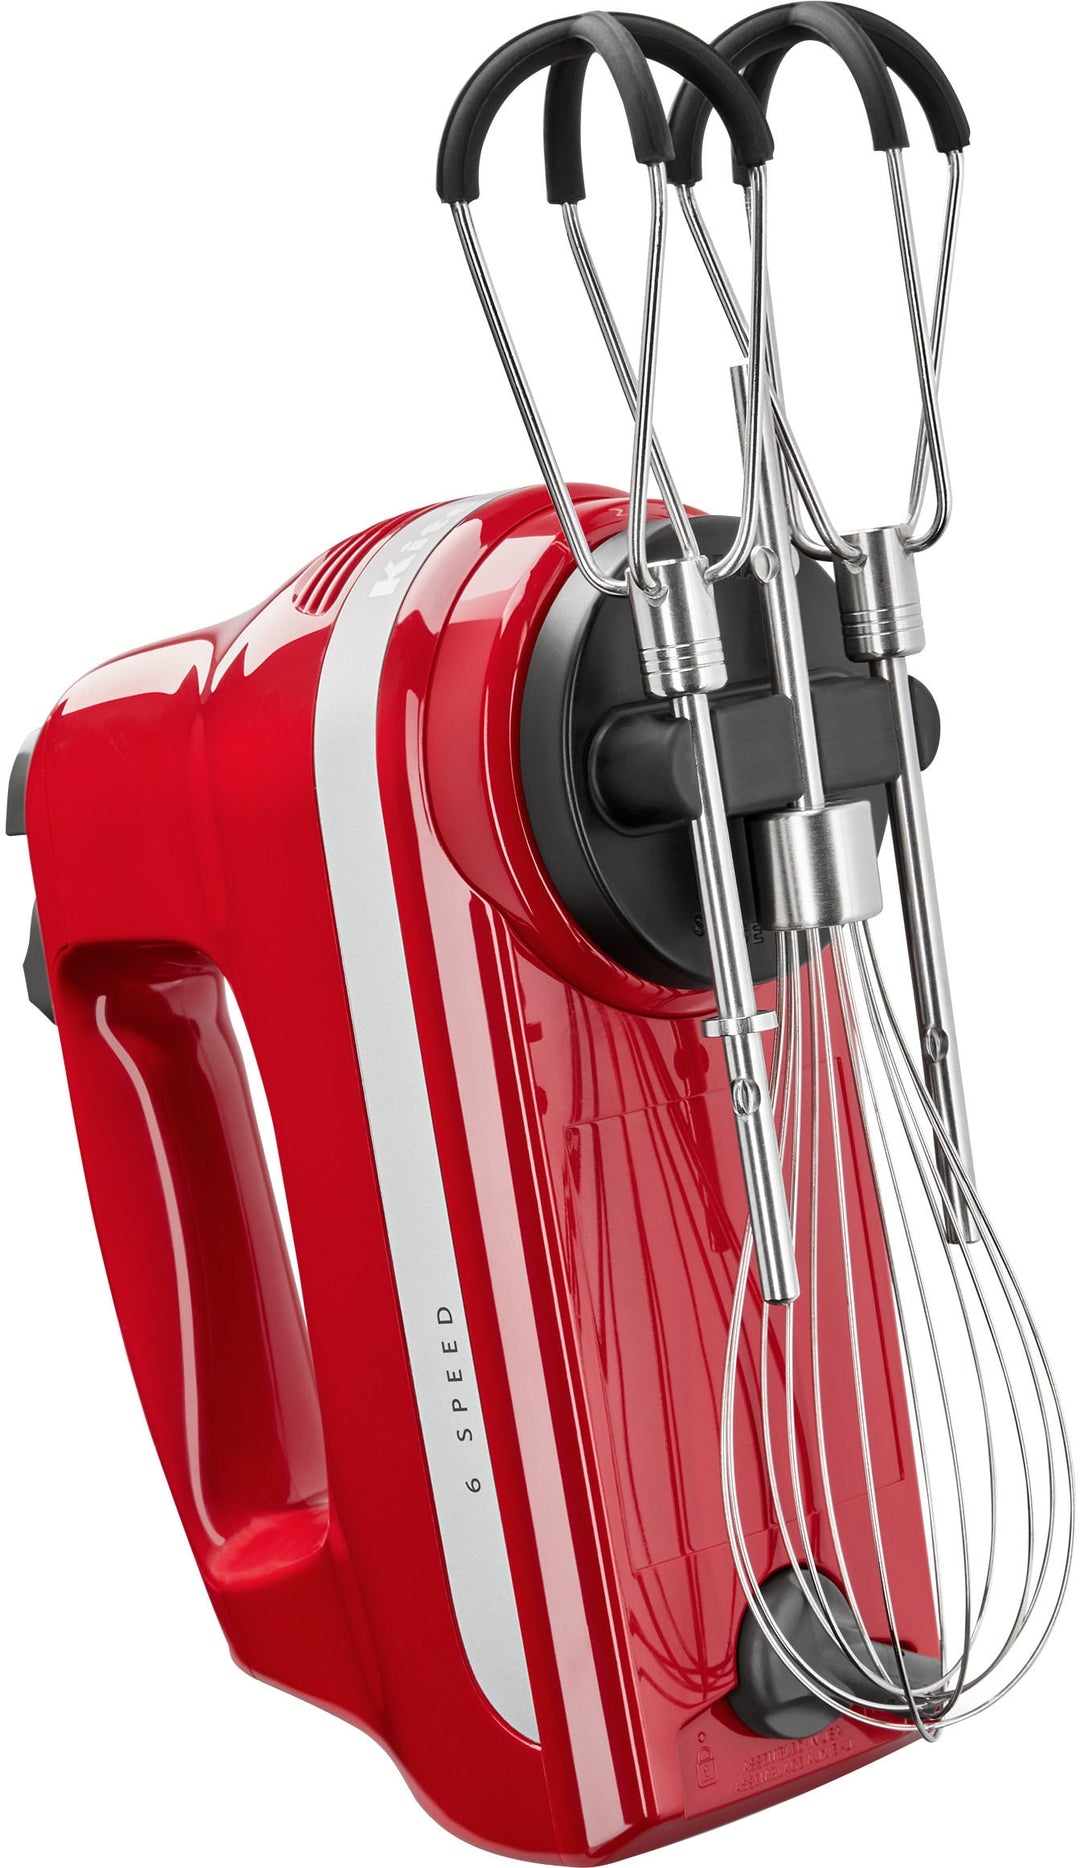 KitchenAid 6 Speed Hand Mixer with Flex Edge Beaters - Empire Red_2